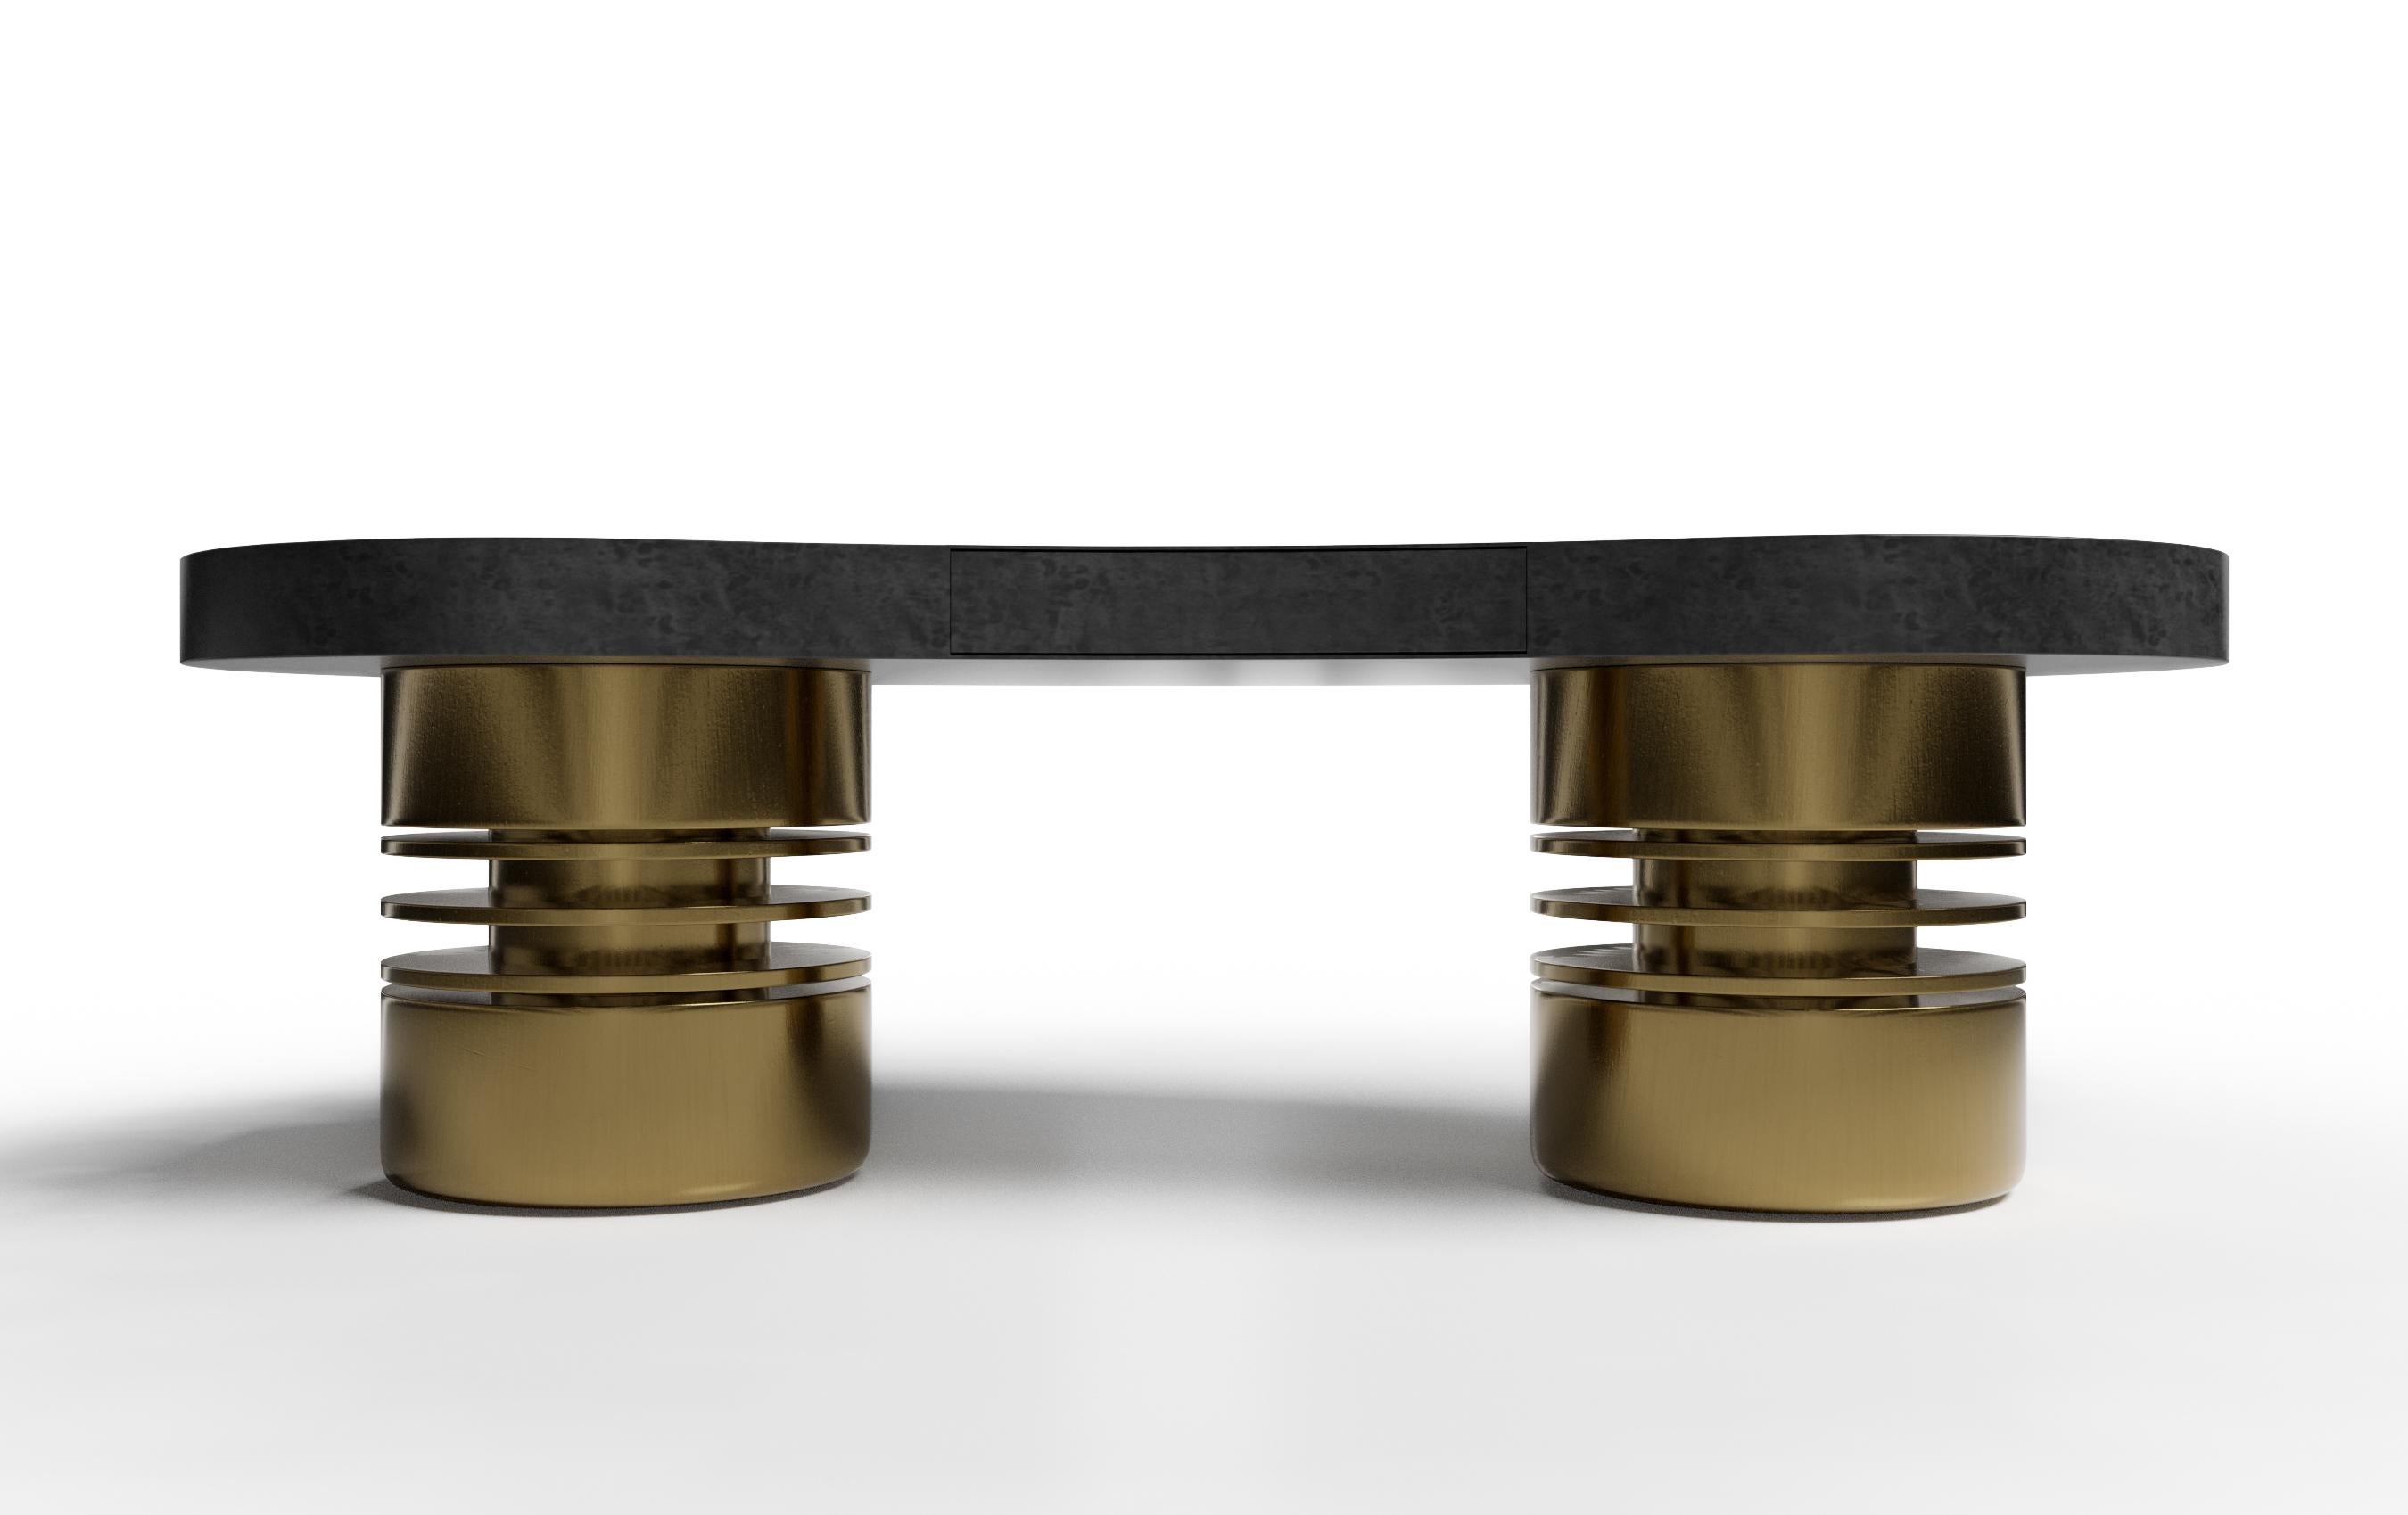 The Bolsa desk sends a strong statement of form and function. With unique cylindrical bases and a luxurious desktop, the Bolsa desk will be the jewel of any room. The Bolsa desk is offered in a variety of woods and finishes and is shown in opulent